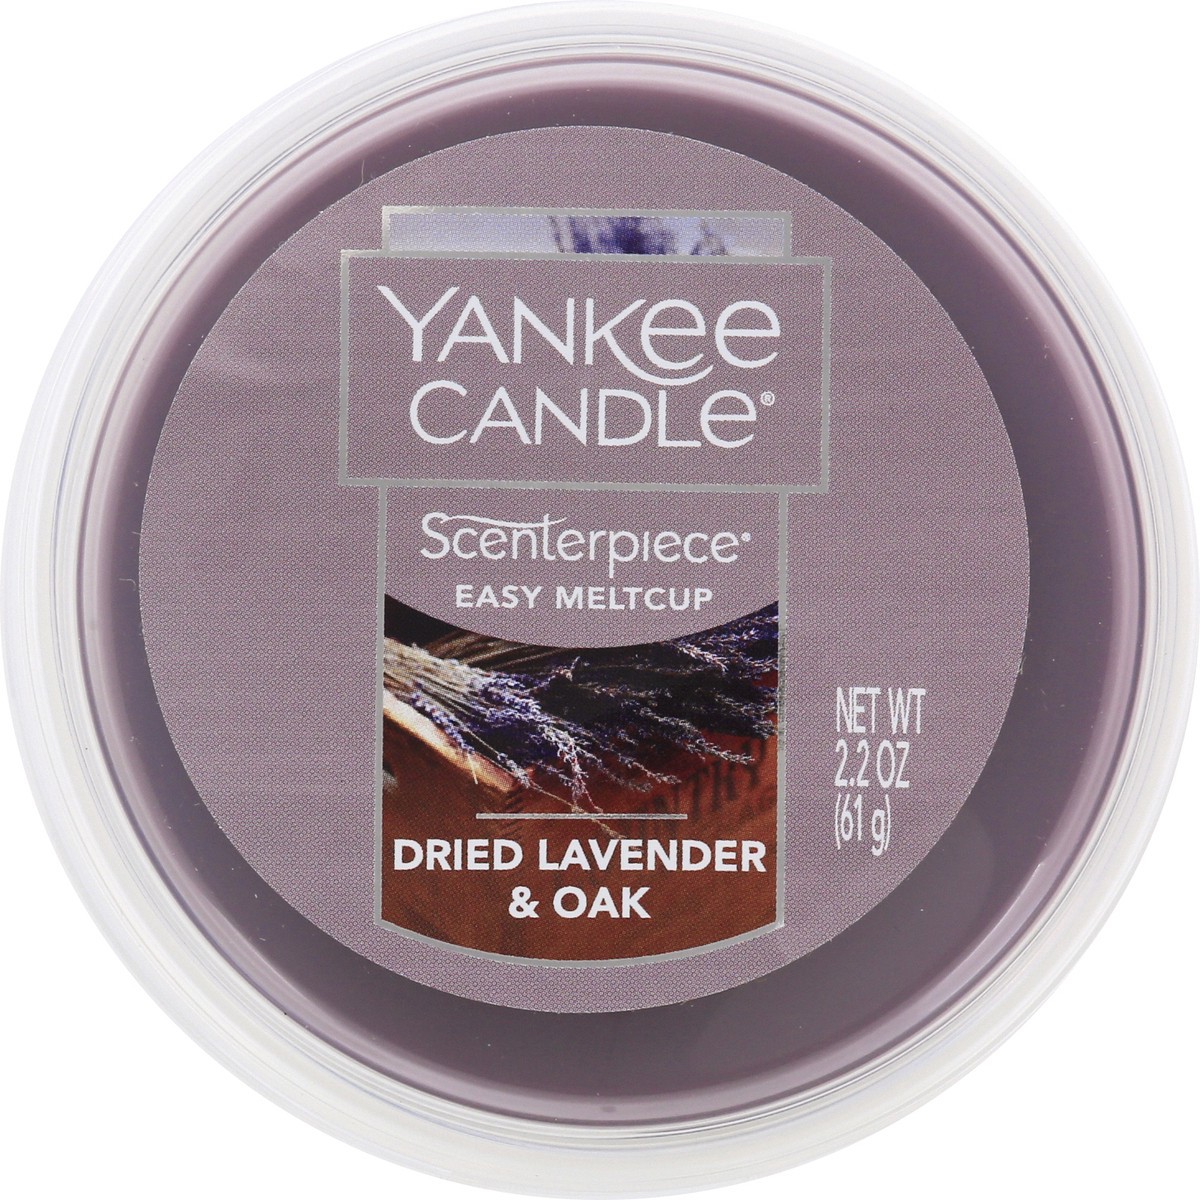 slide 4 of 7, Yankee Candle Scenterpiece Wax Cup Dried Lavender & Oak, 2.2 oz